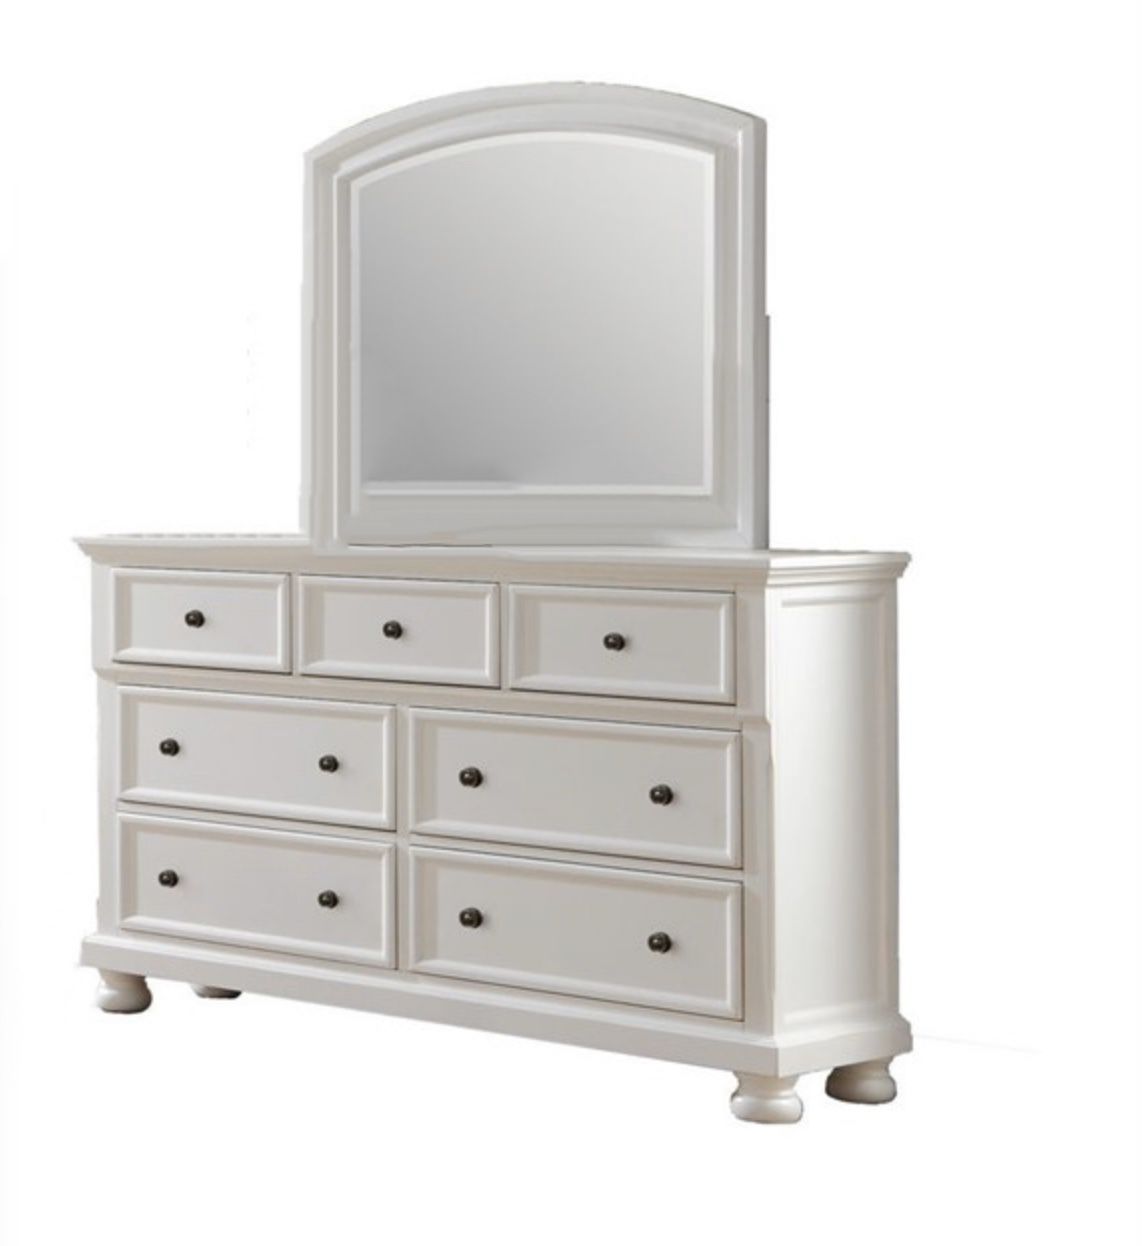 Laurelin by Homelegance~White dresser with Mirror -Brand New in box